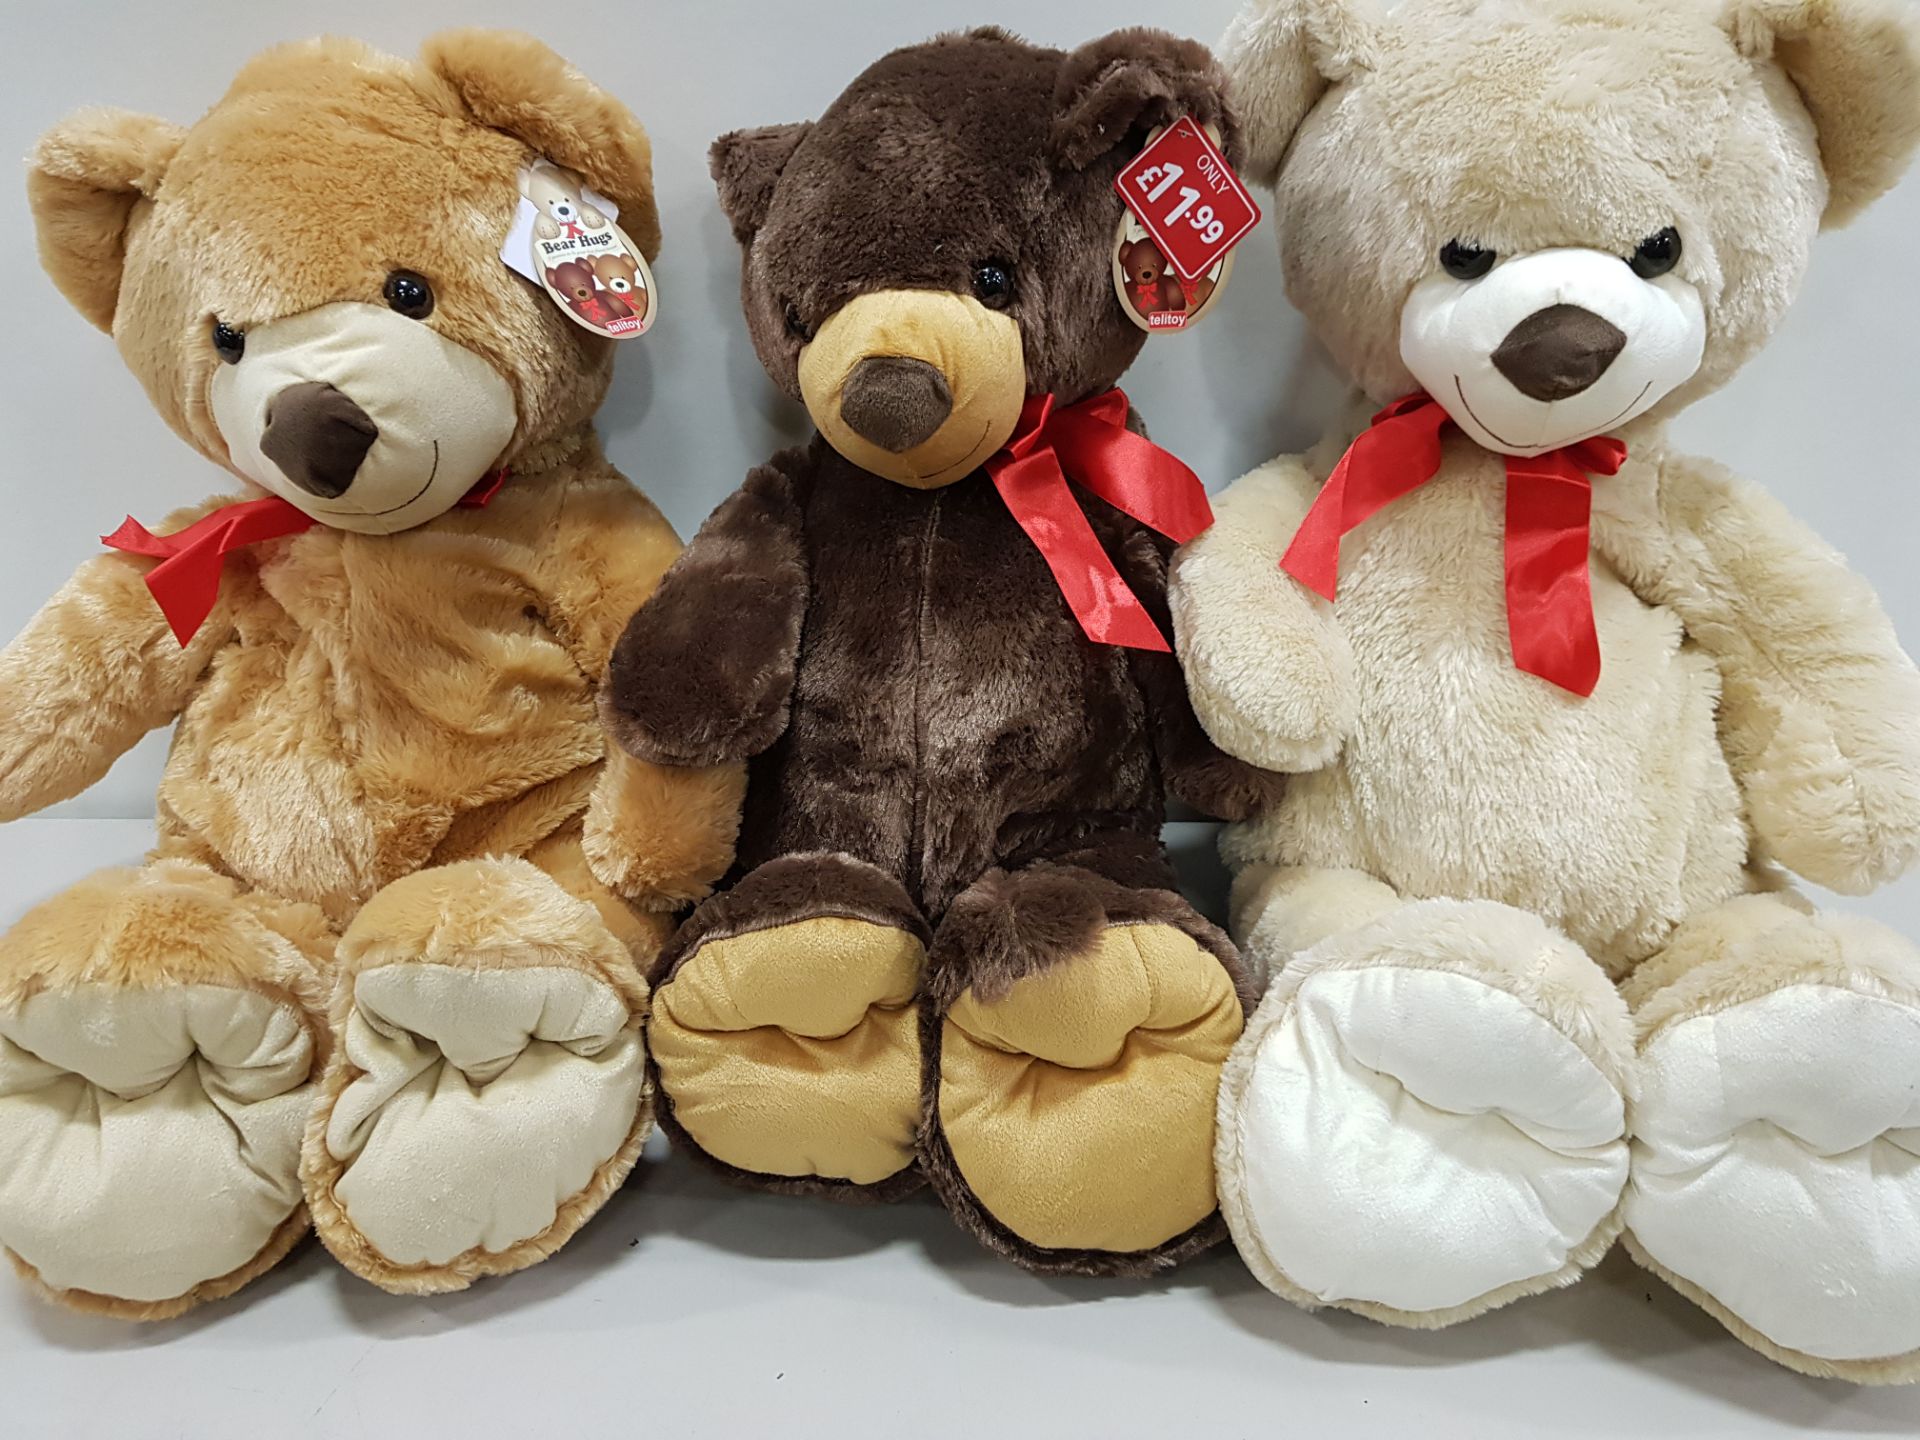 16 X BRAND NEW 100CM TELITOY BEAR HUGS SOFT TOYS IN BROWN AND WHITE RRP £11.99 CONTAINED IN 2